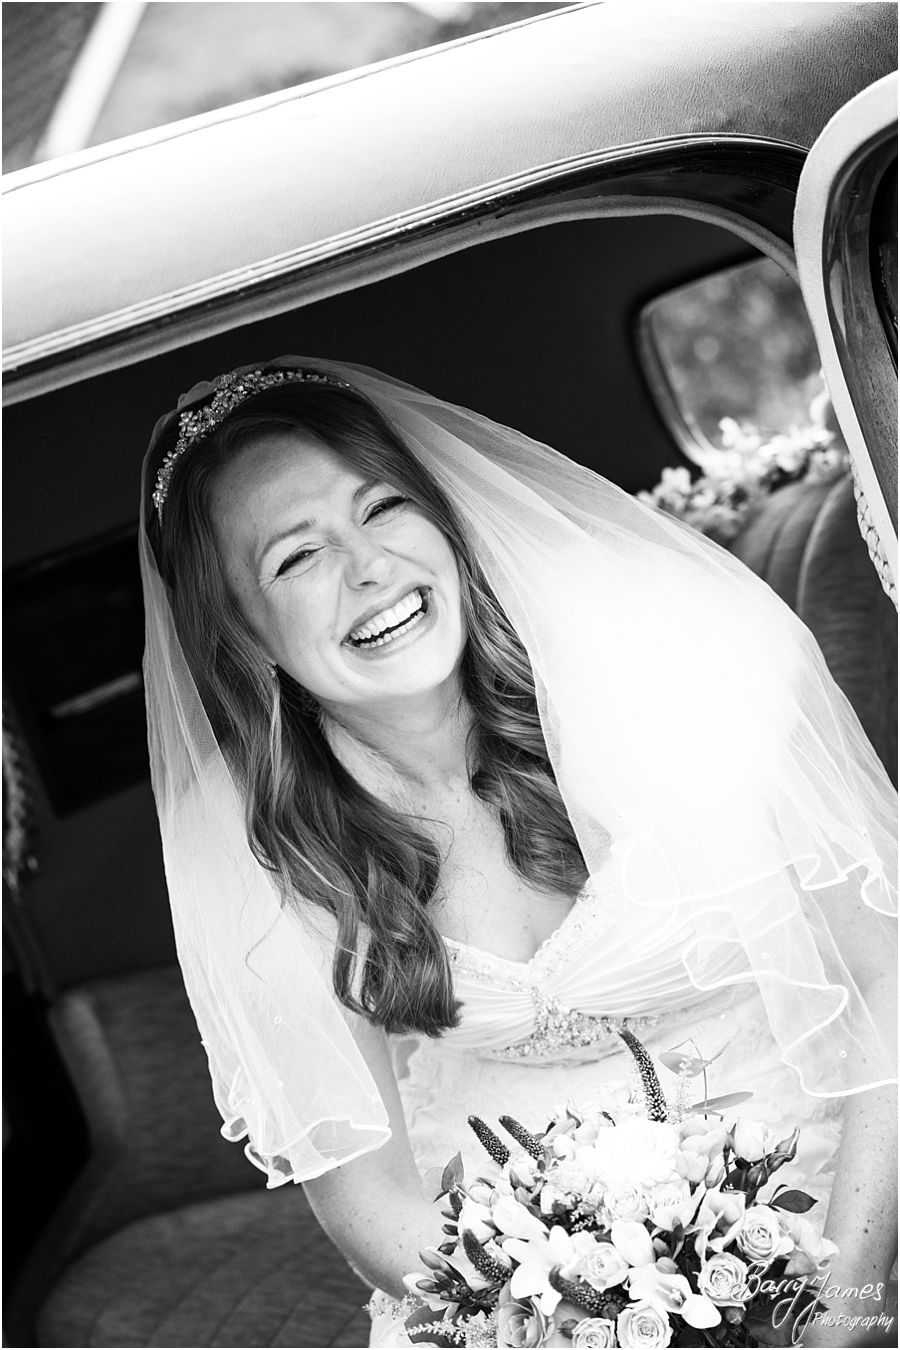 Stunning winter wedding photographs at All Saints Church in Streetly by Walsall Wedding Photographer Barry James